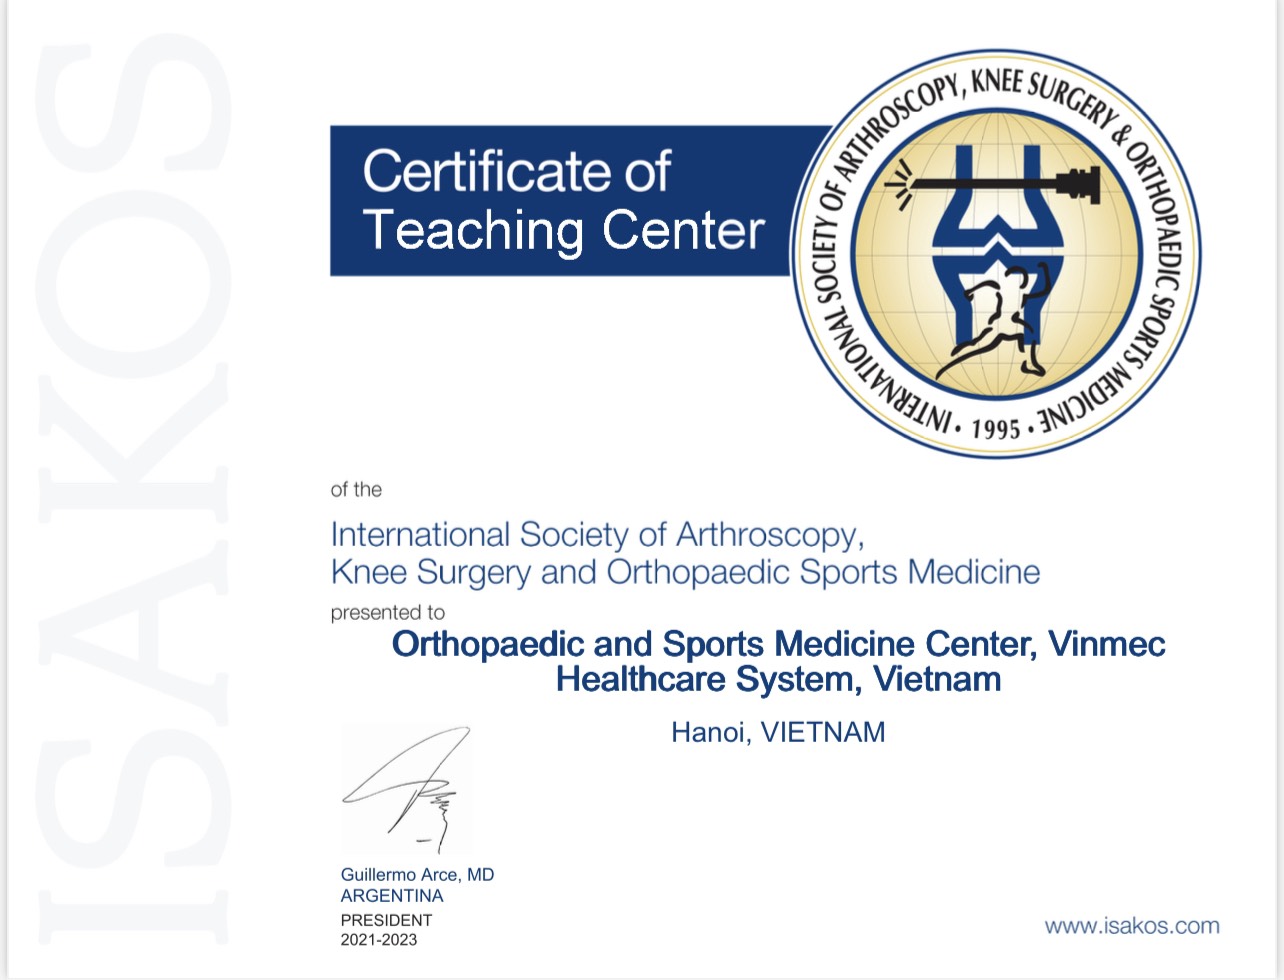 Center for Orthopedics and Sports Medicine, Vinmec Health System is recognized as a Teaching Center by ISAKOS